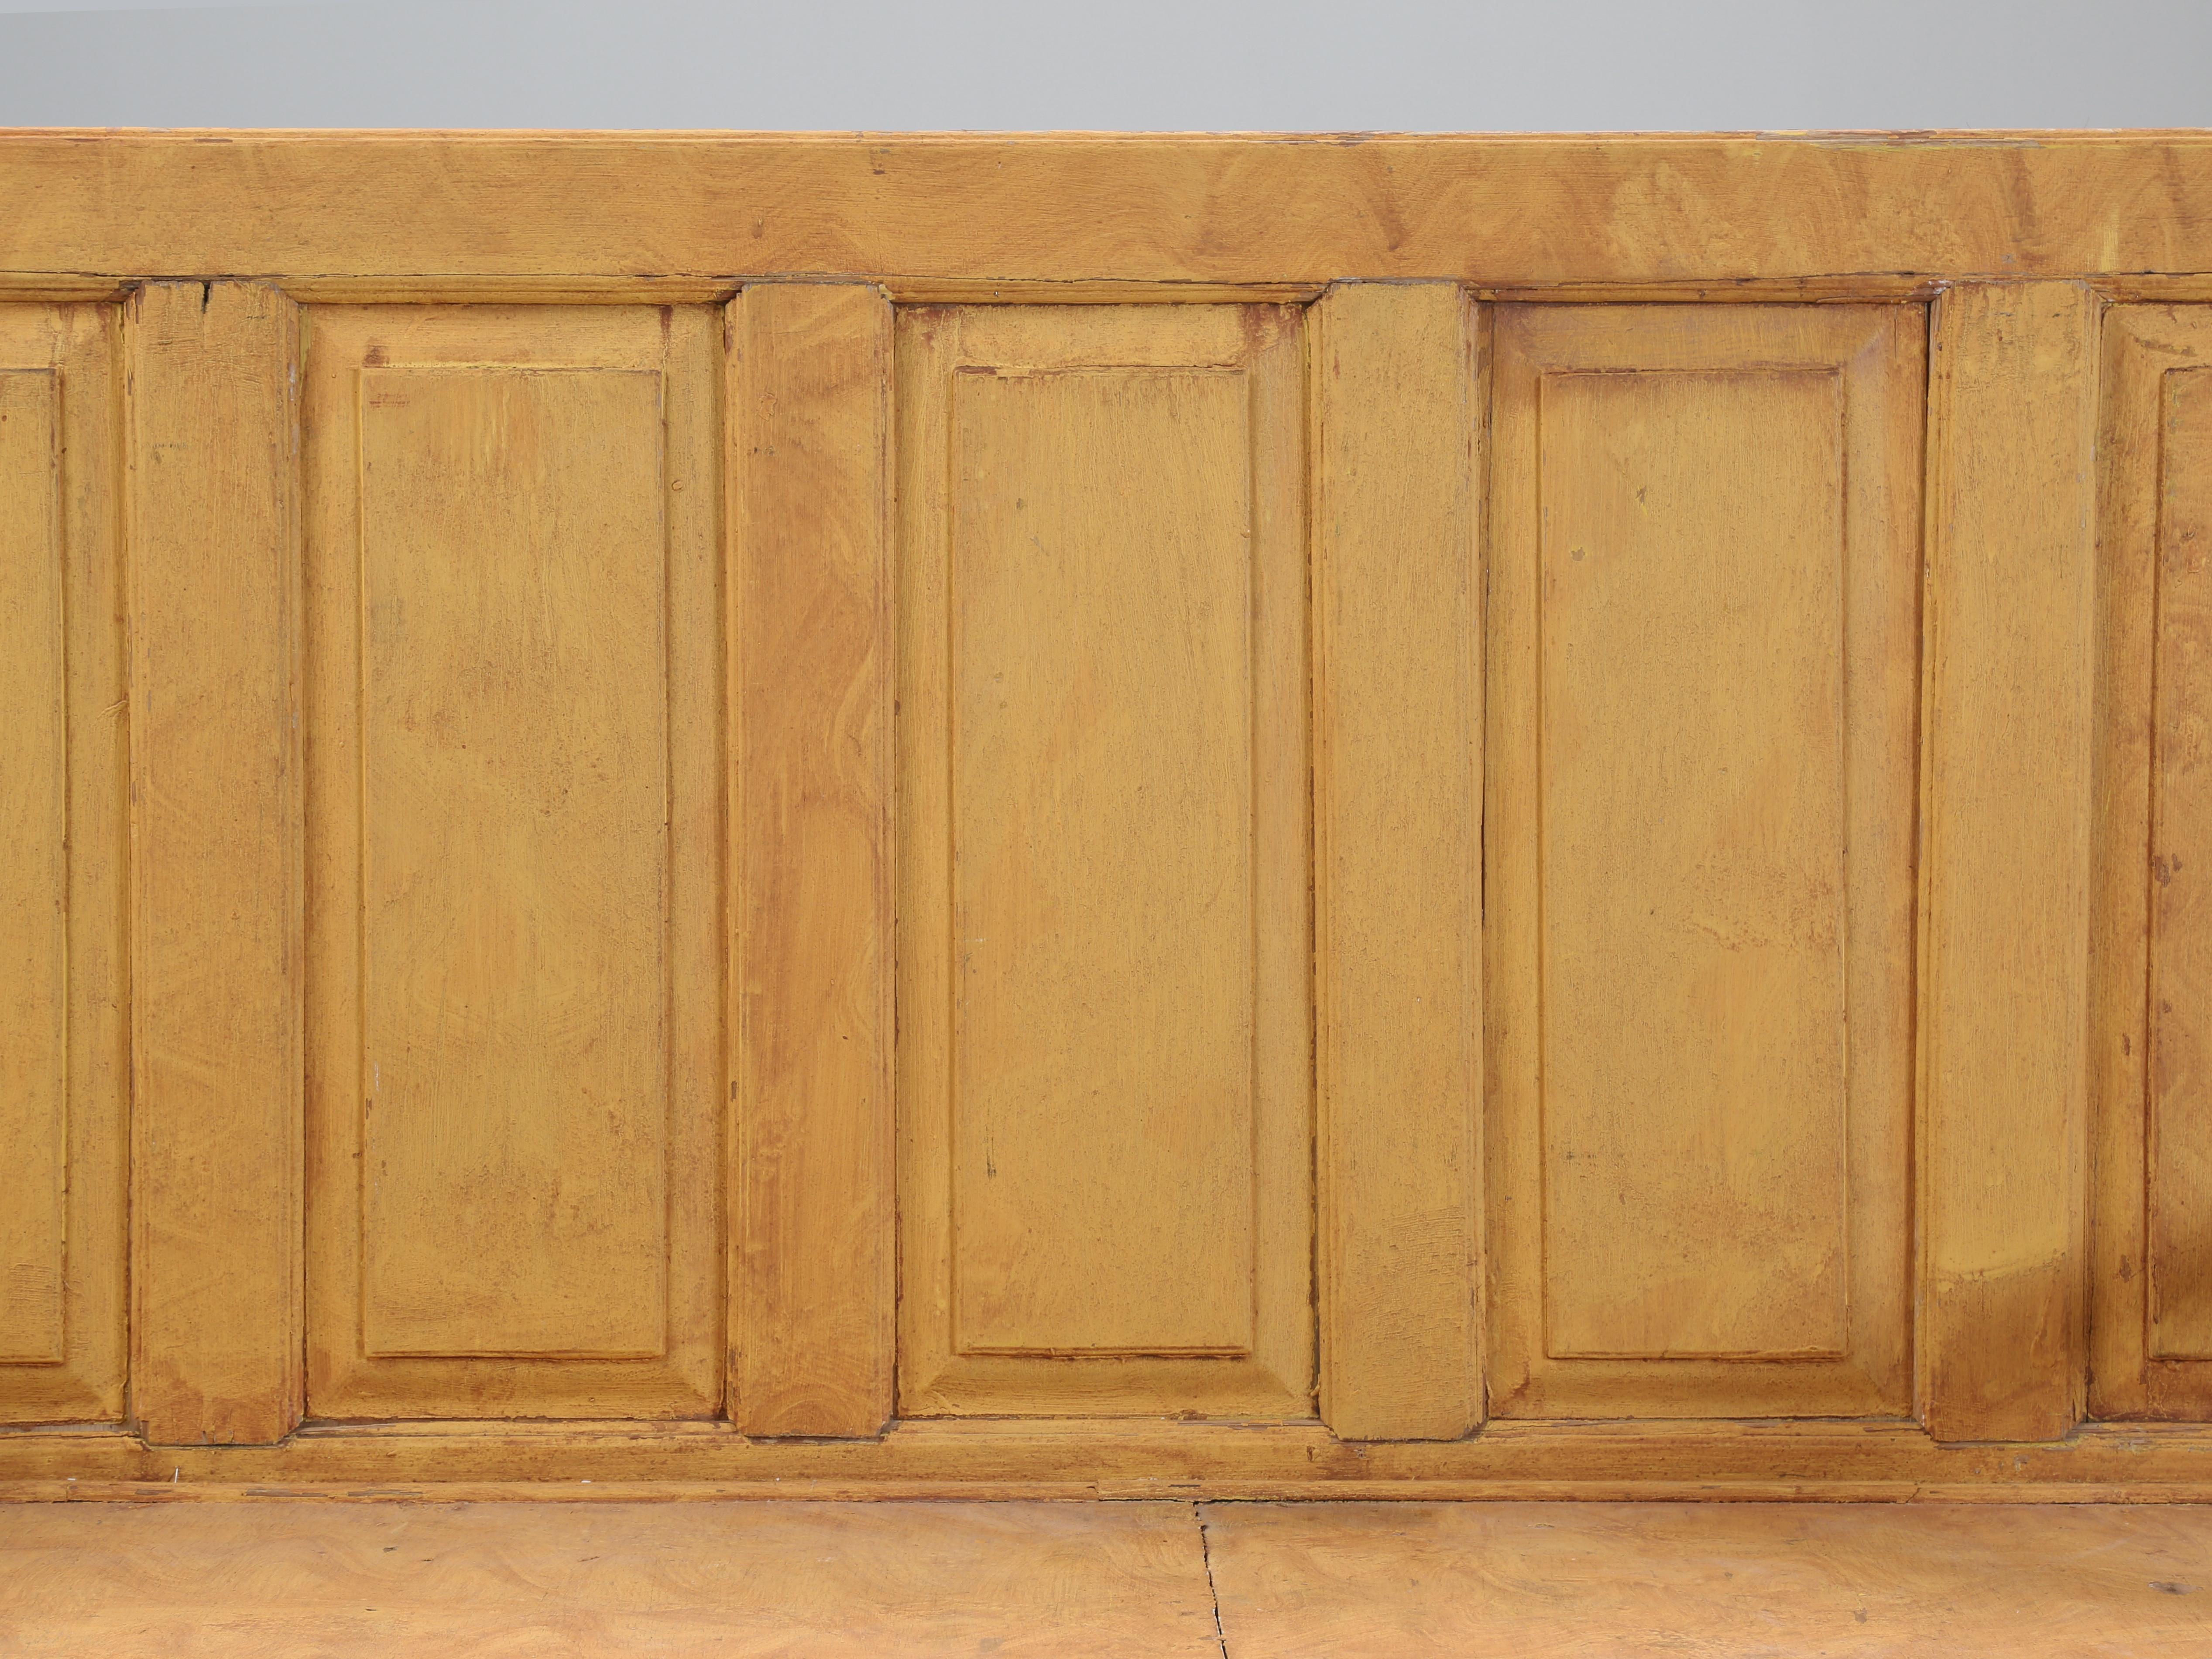 Hand-Crafted Antique Irish Pine Bench in an Old Scumbled Painted Finish Late 1800's Original For Sale